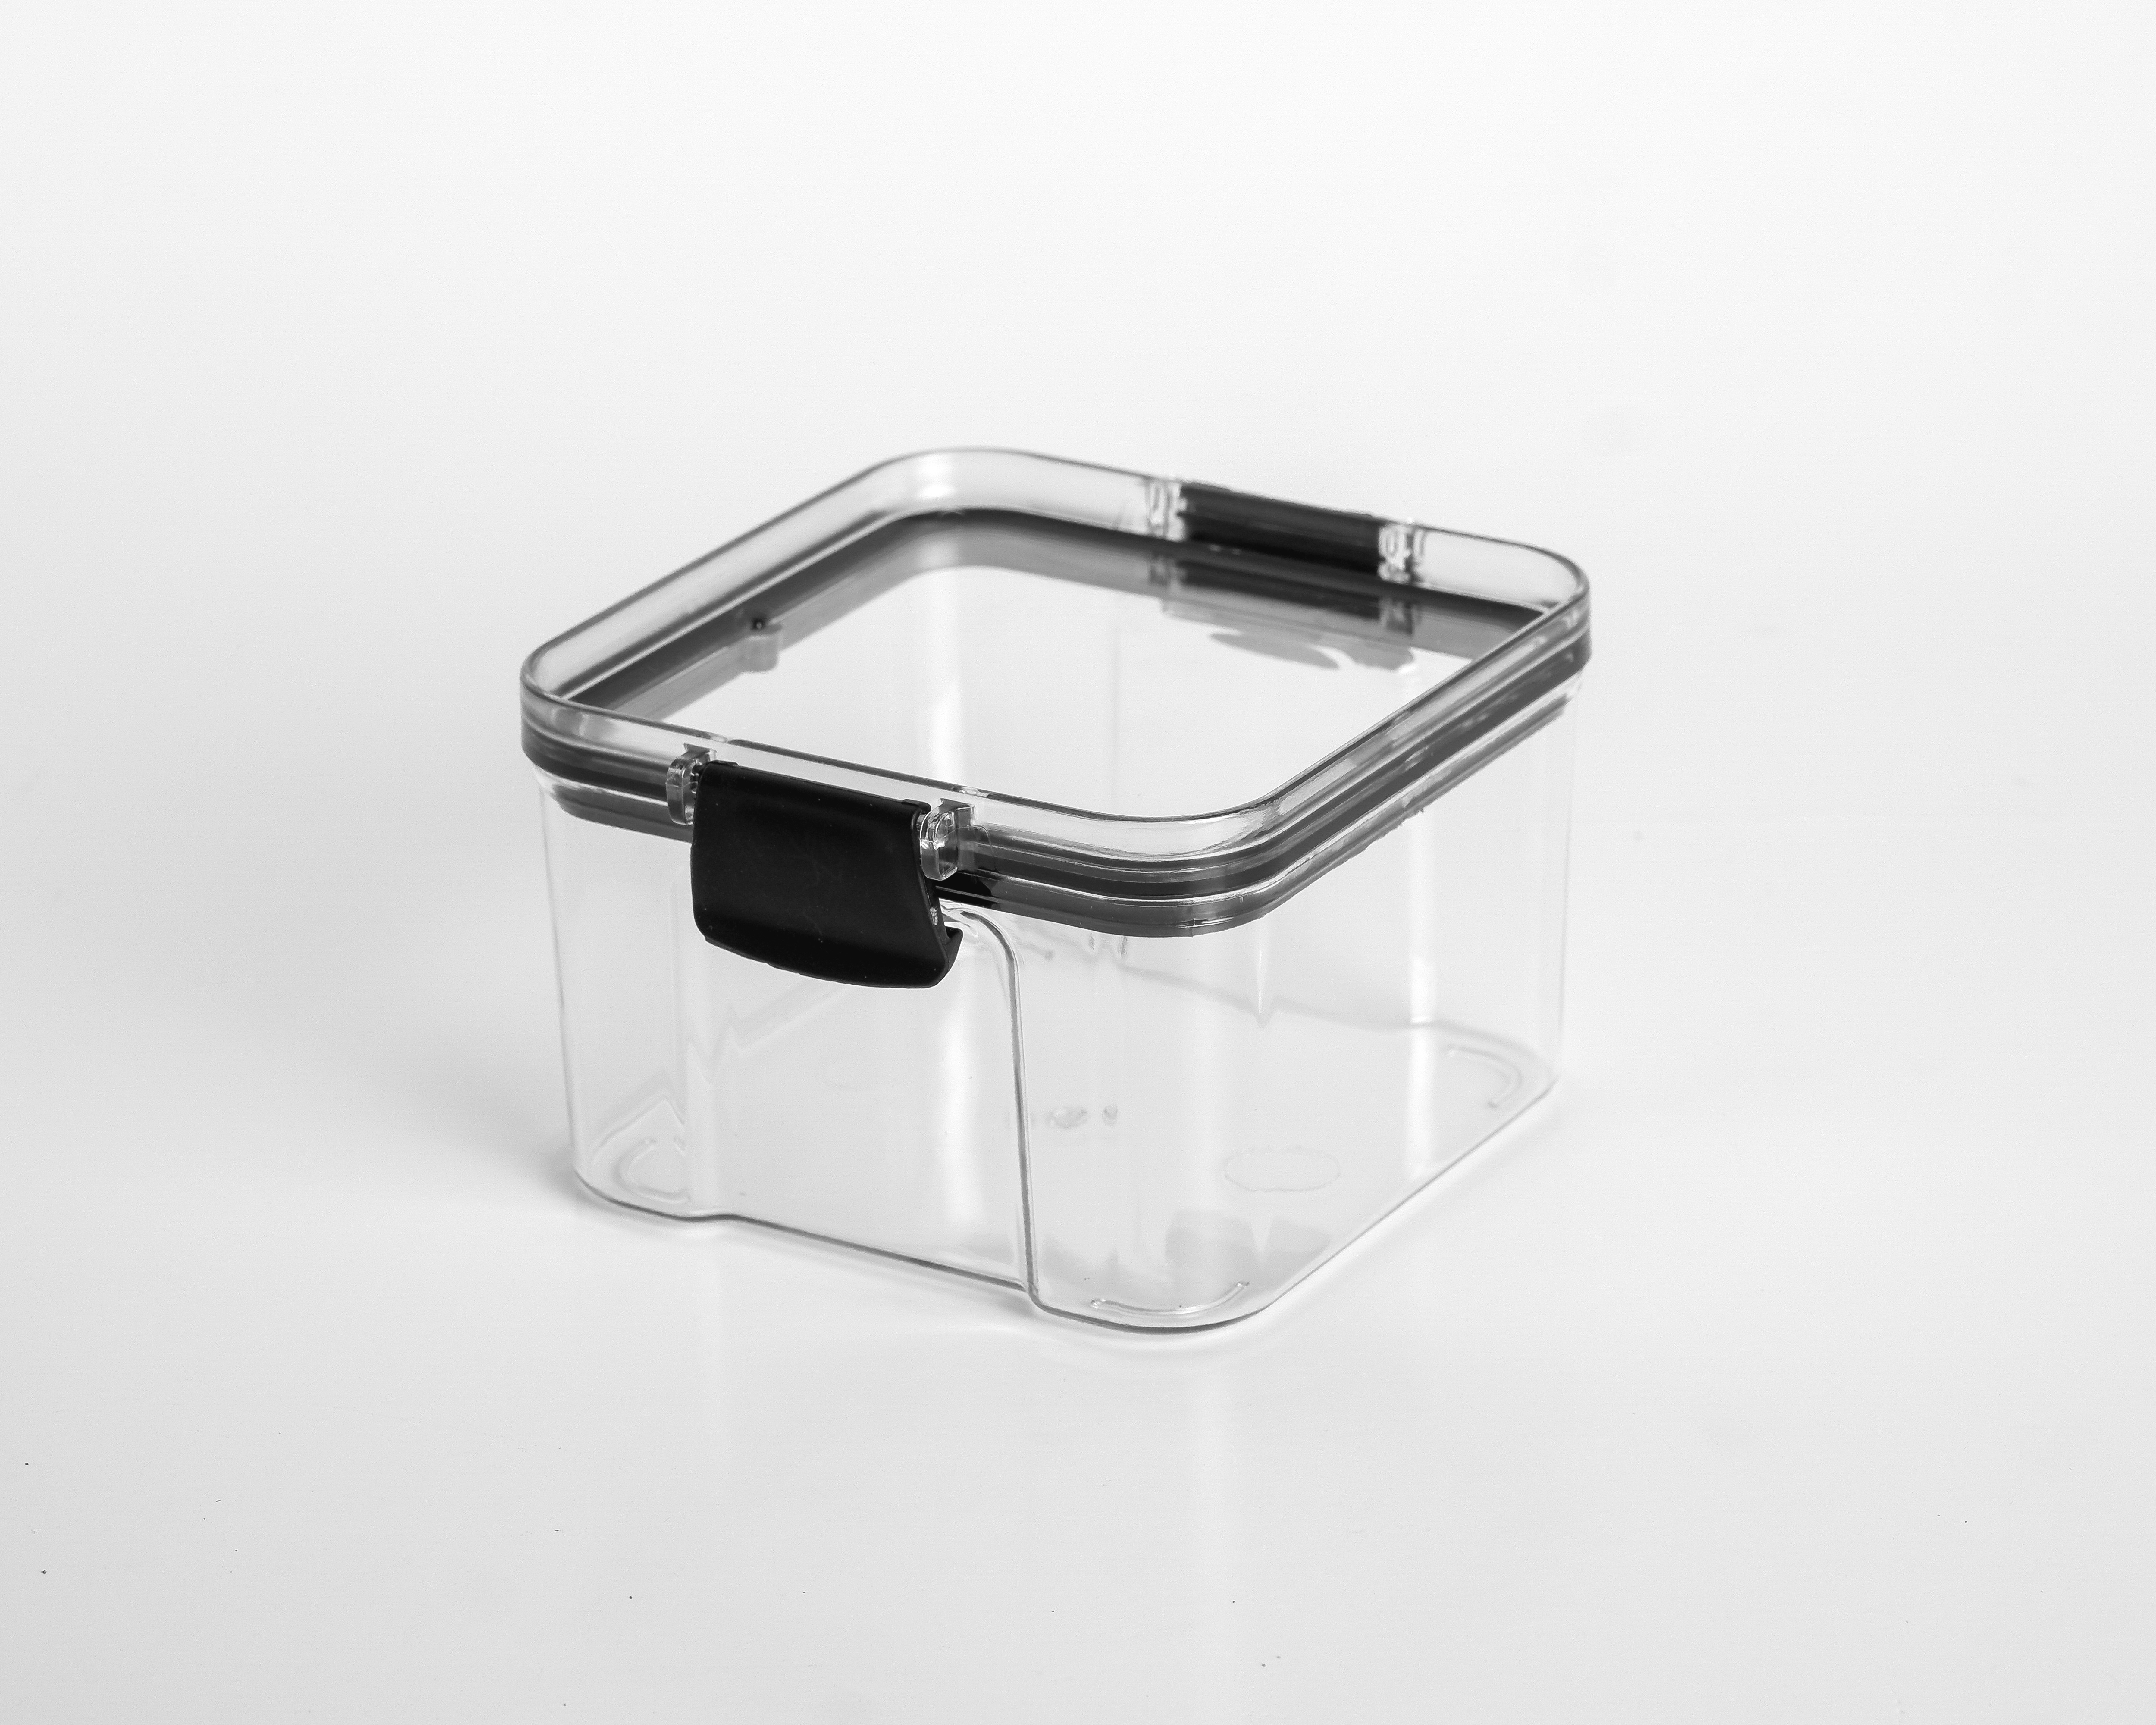 Luna Airtight Containers – Neat Nook PH